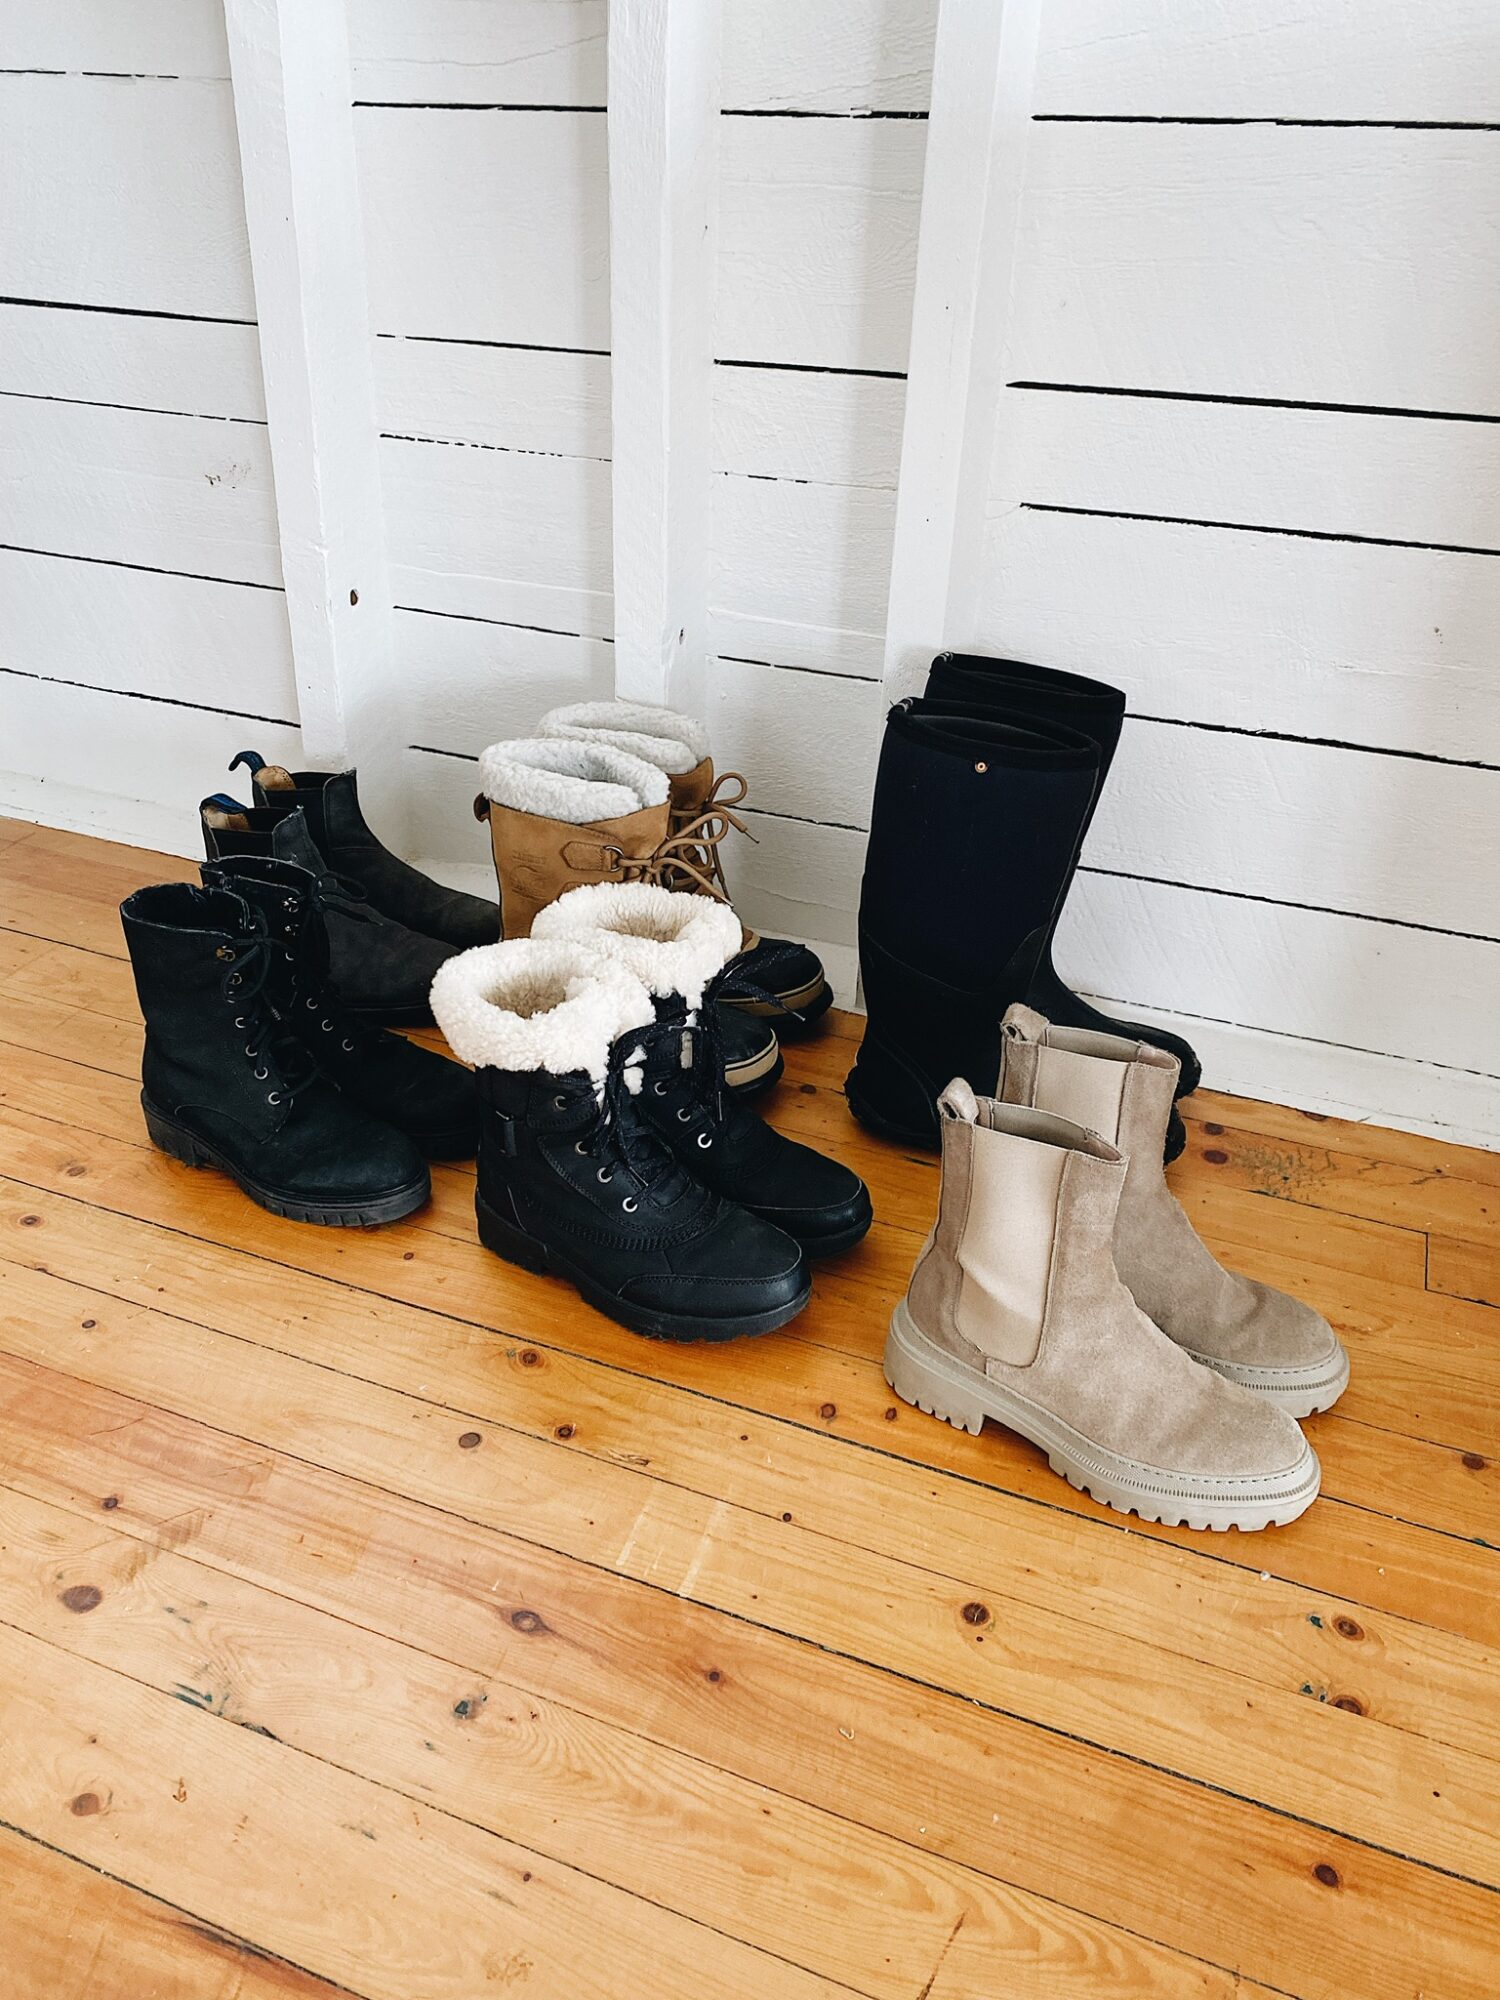 MY CURRENT WINTER BOOT COLLECTION